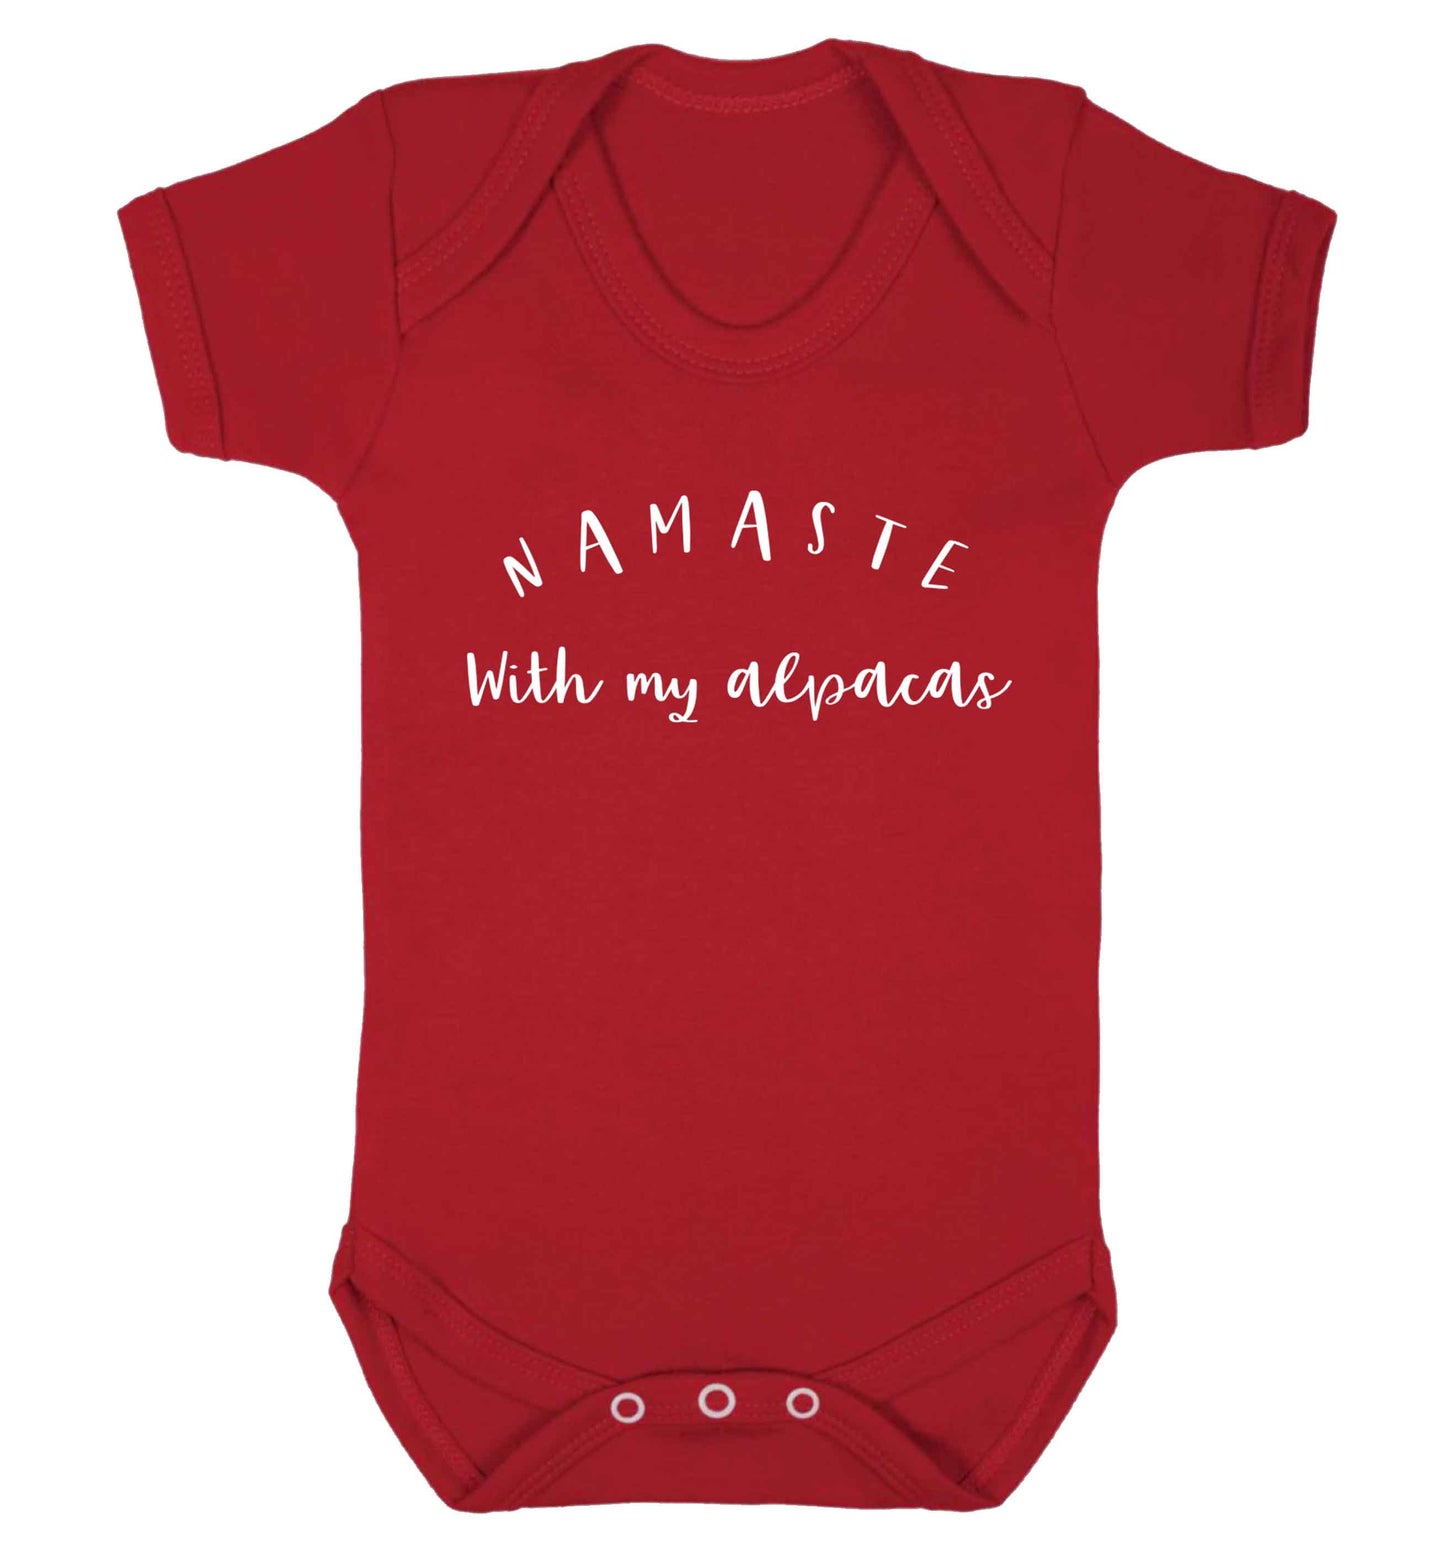 Namaste with my alpacas Baby Vest red 18-24 months